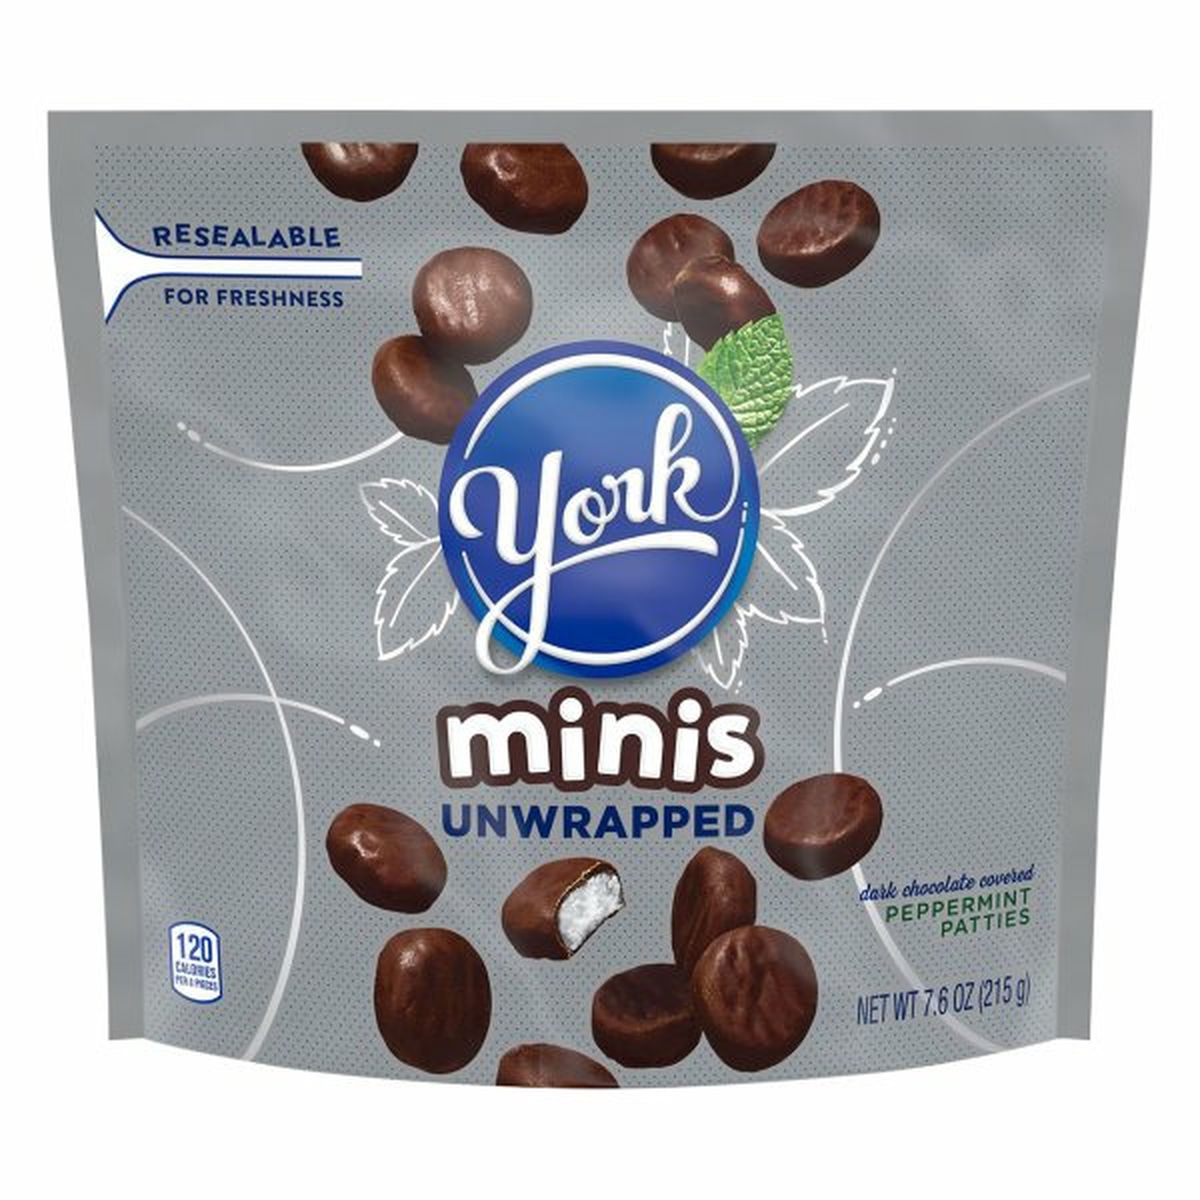 Calories in YORK Peppermint Patties, Dark Chocolate Covered, Minis, Unwrapped